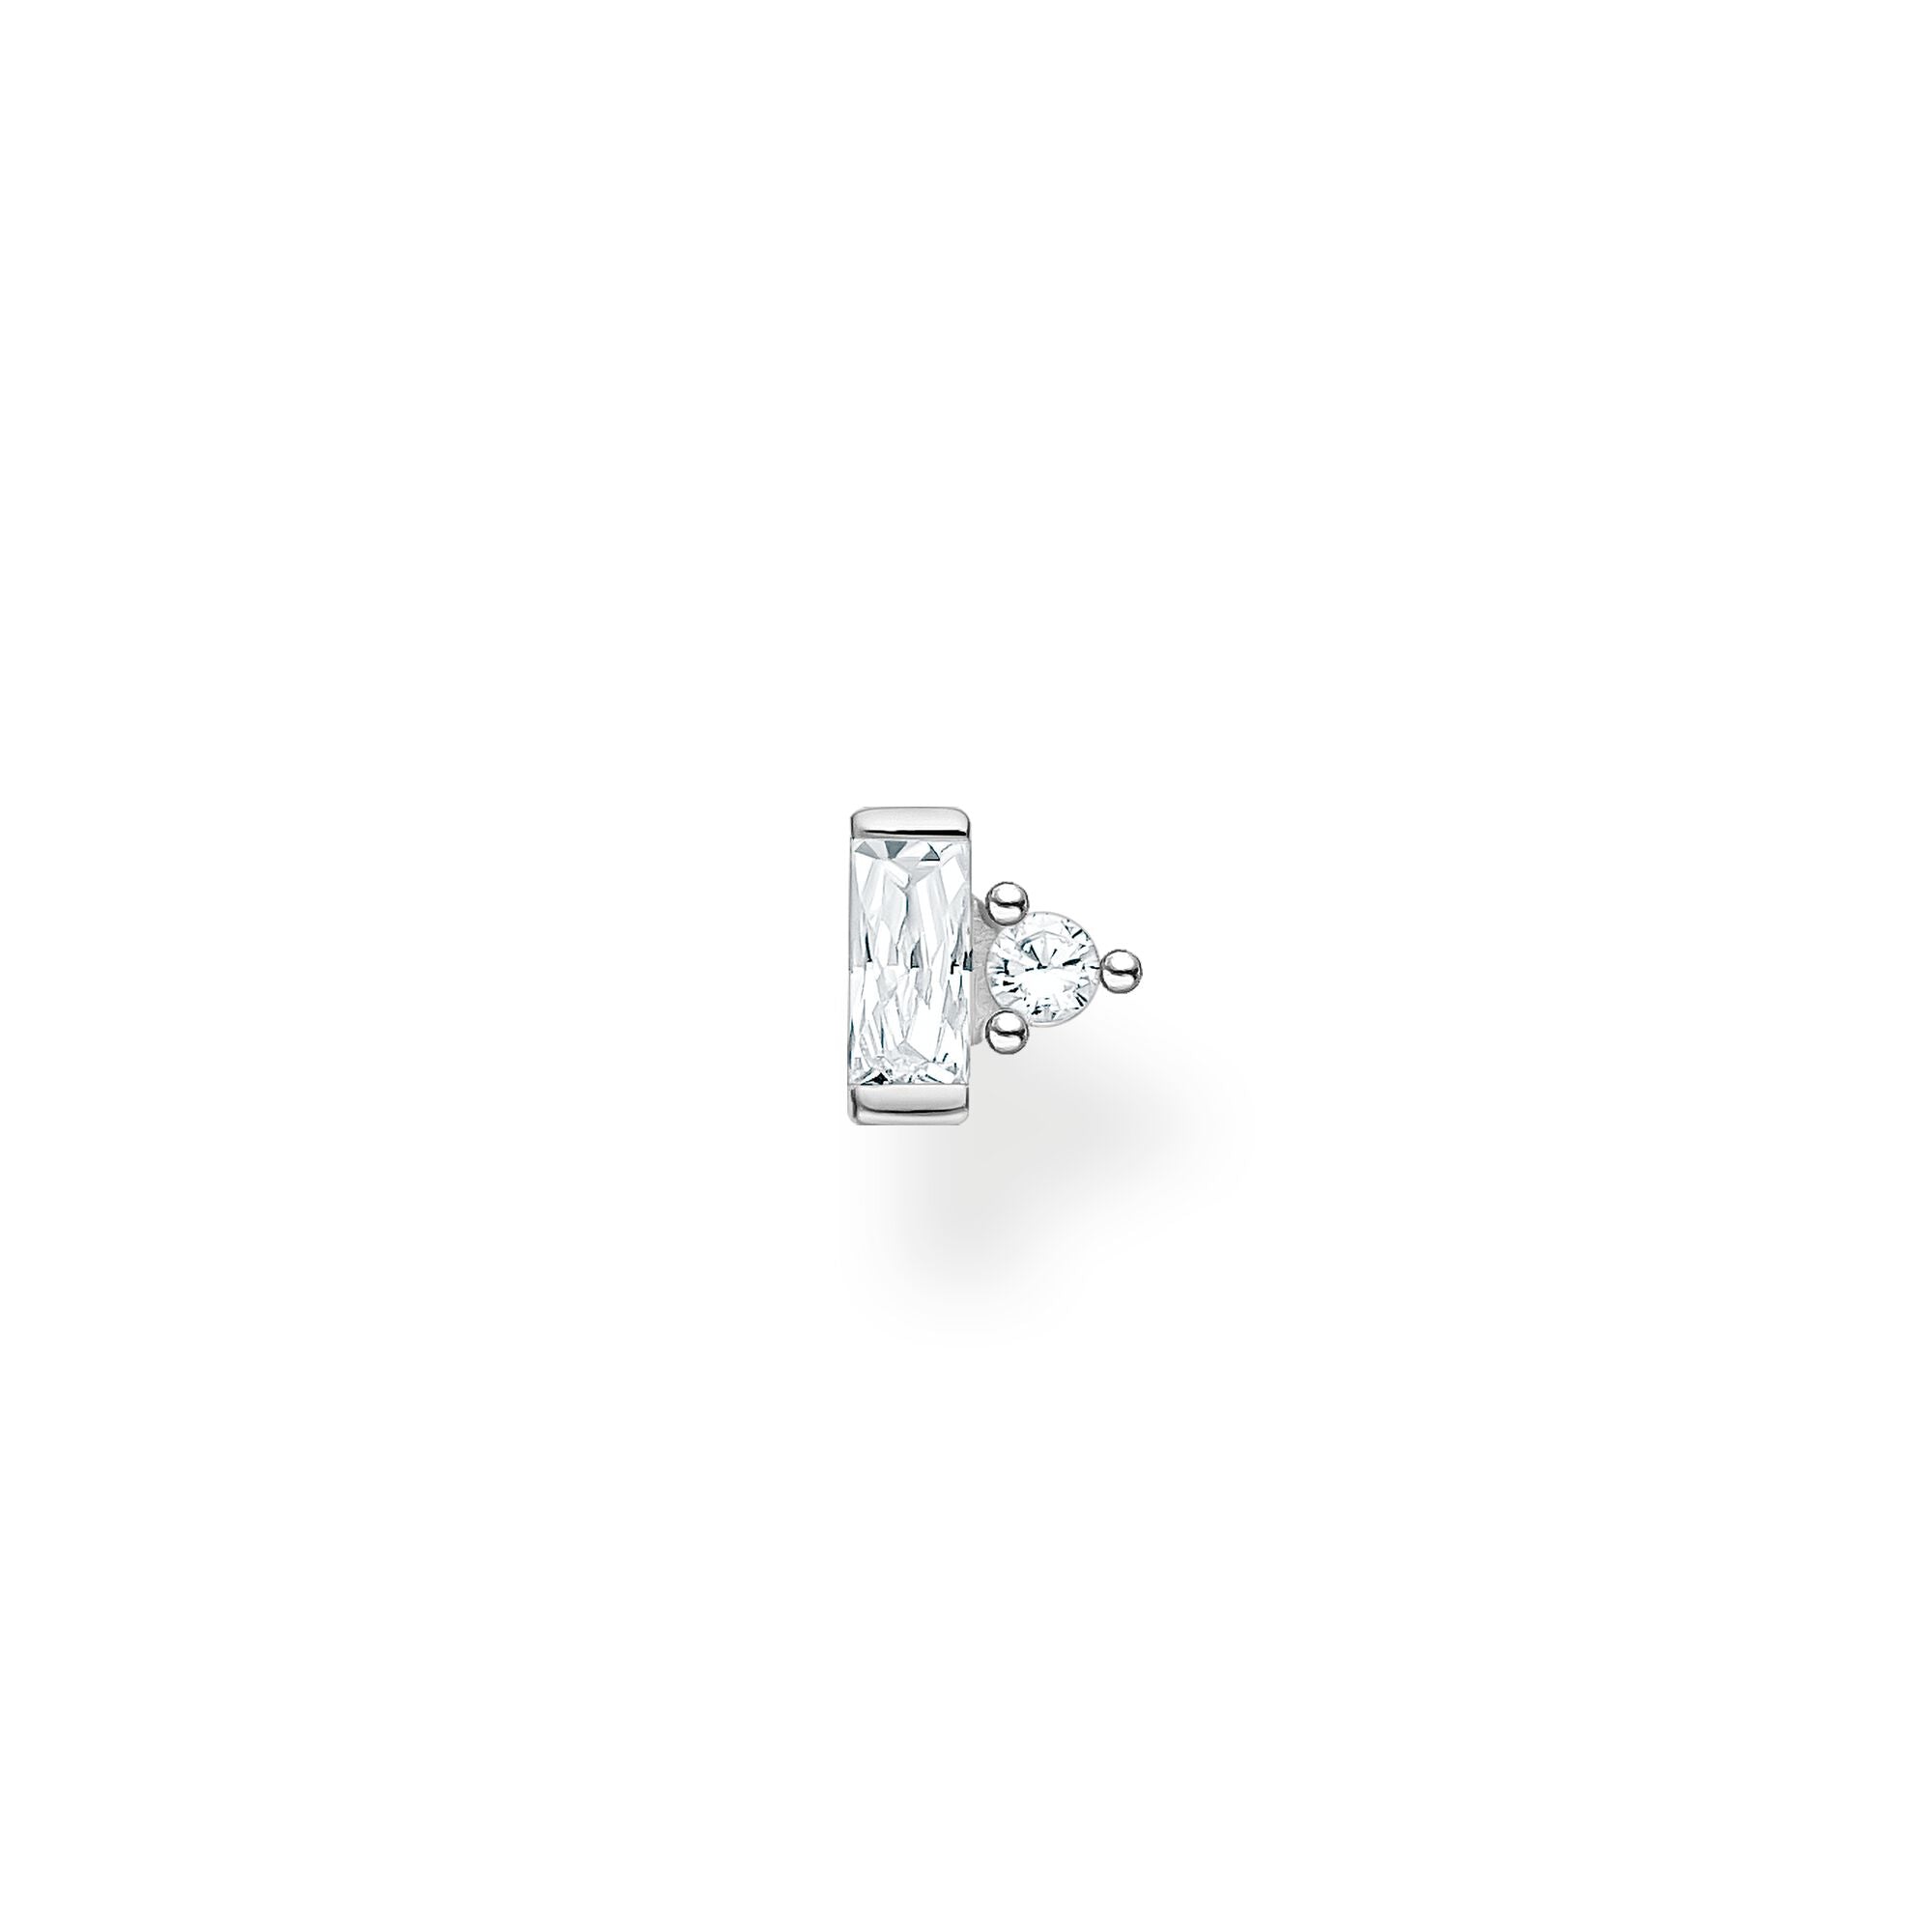 Thomas Sabo sterling silver and white baguette stone with round stone accent, single stud earring